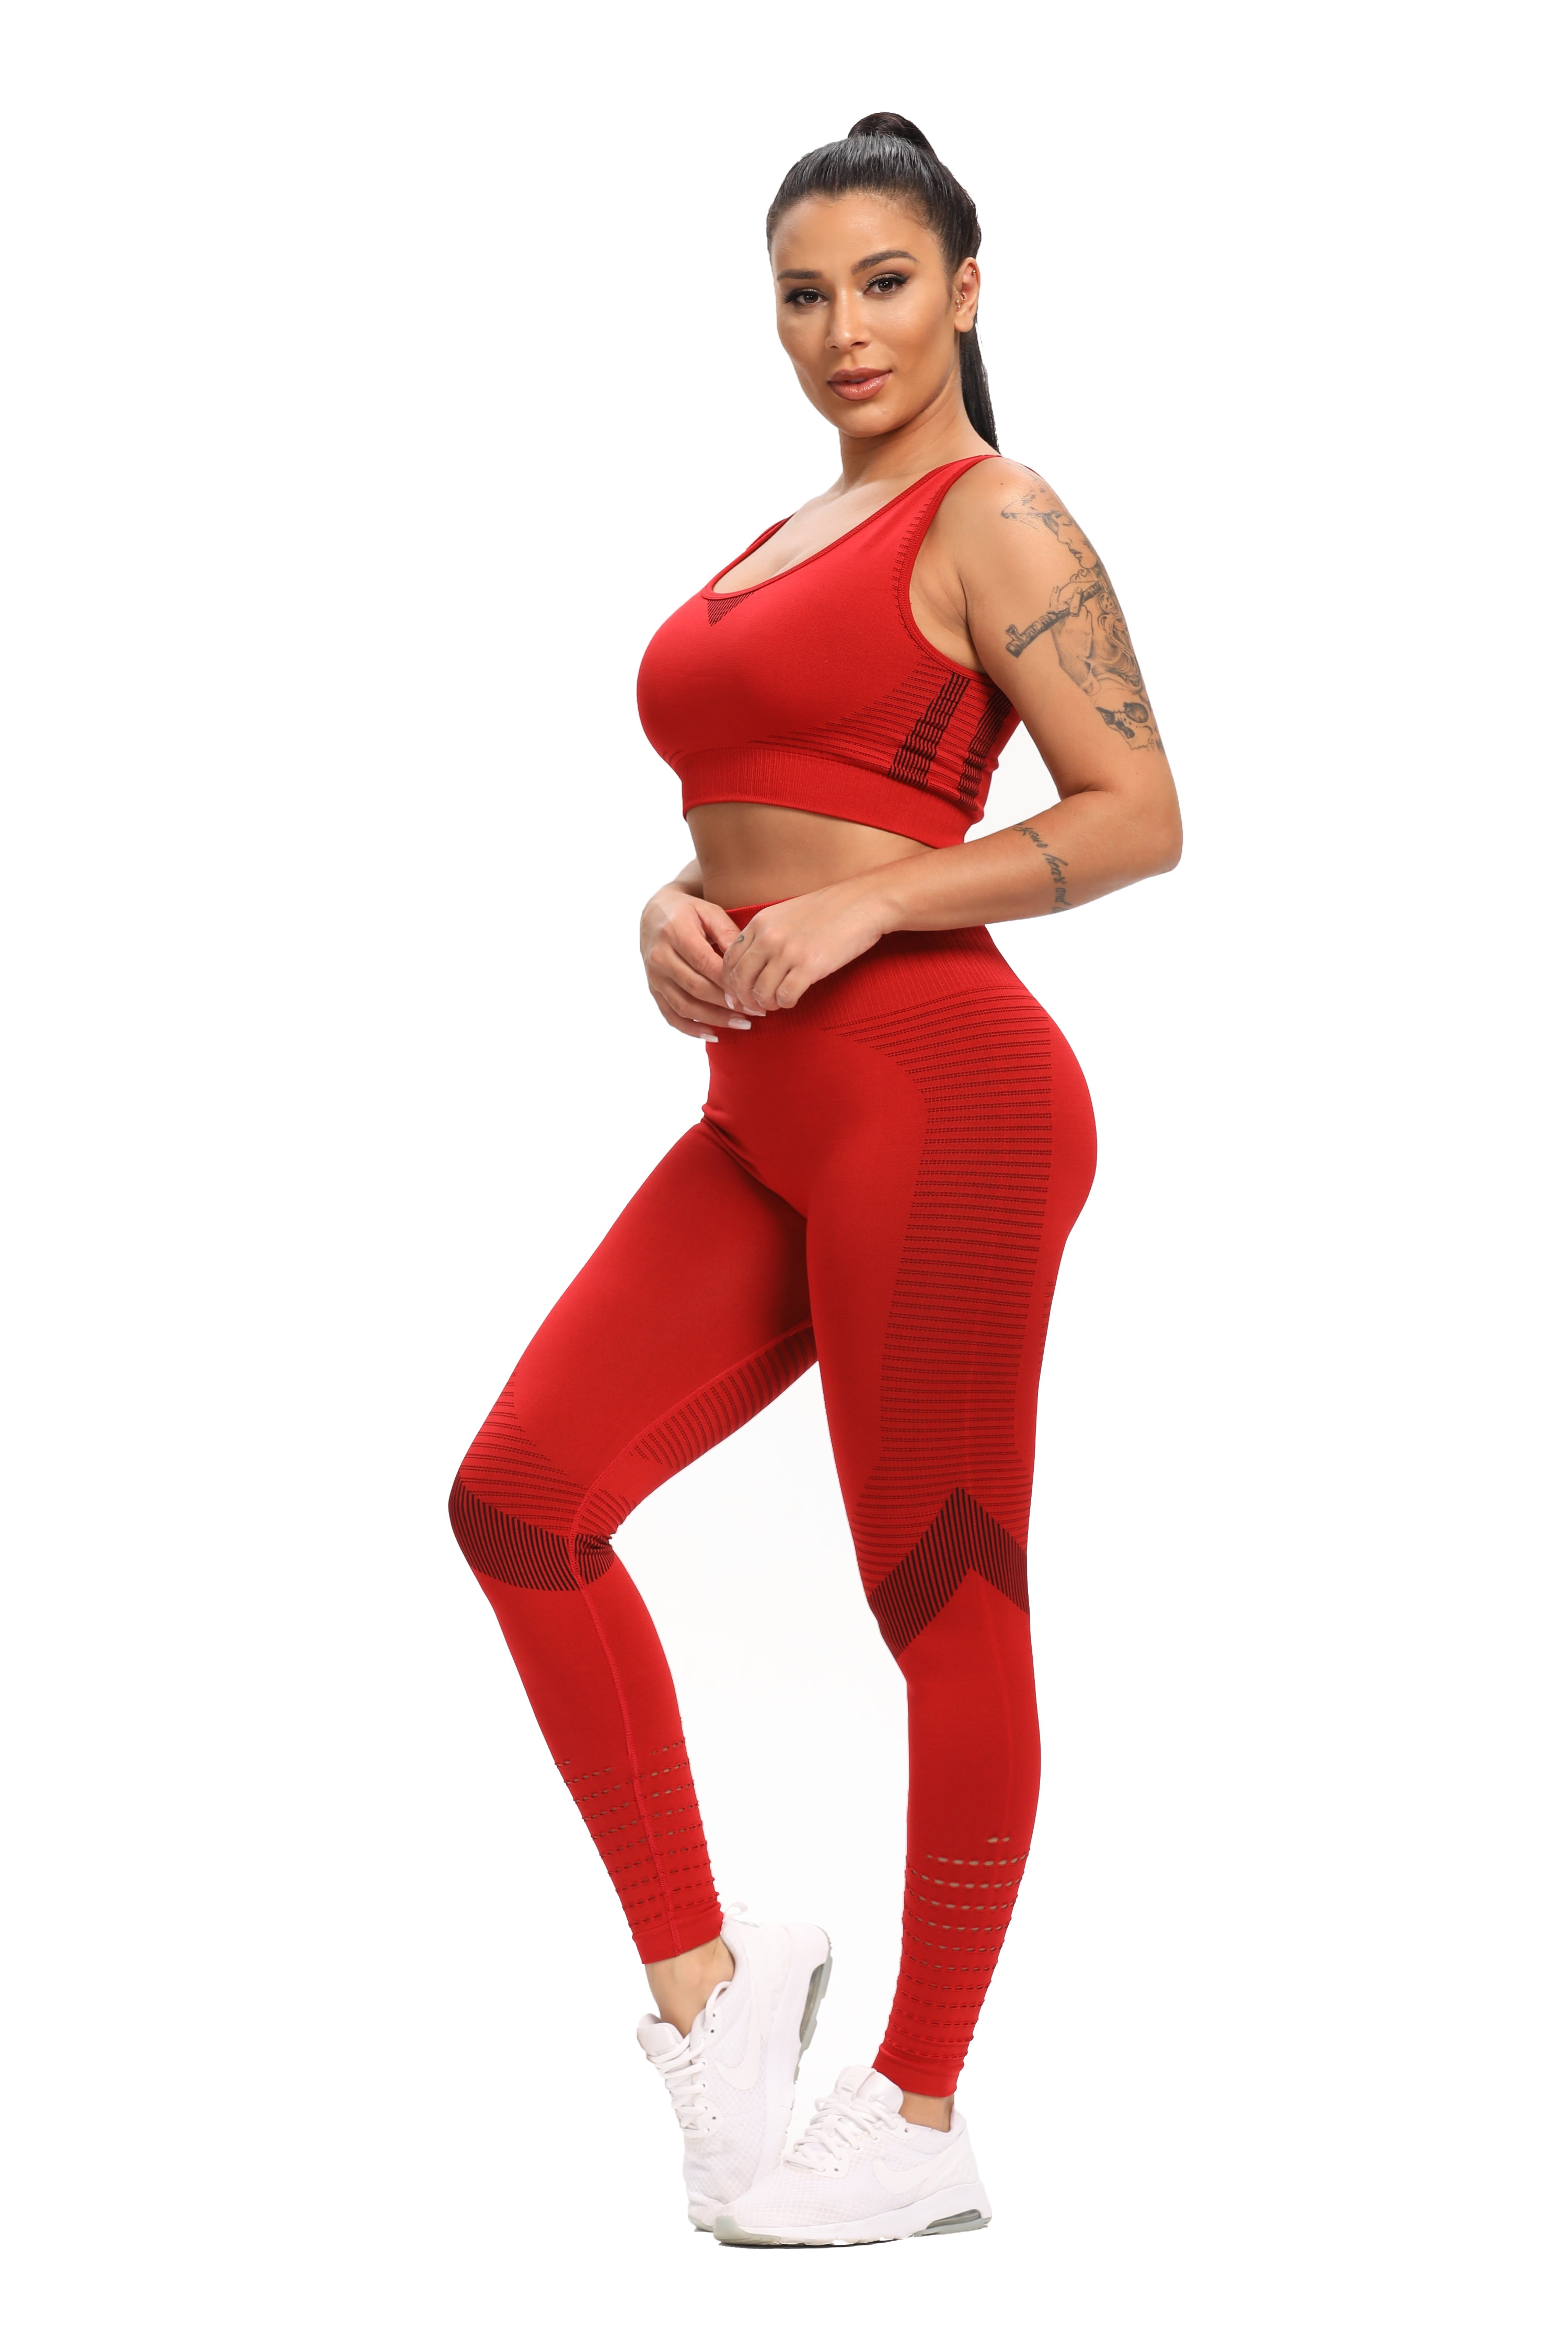 Yoga Exercise Gym Sports Workout Athletic Women Outfits 2 piece